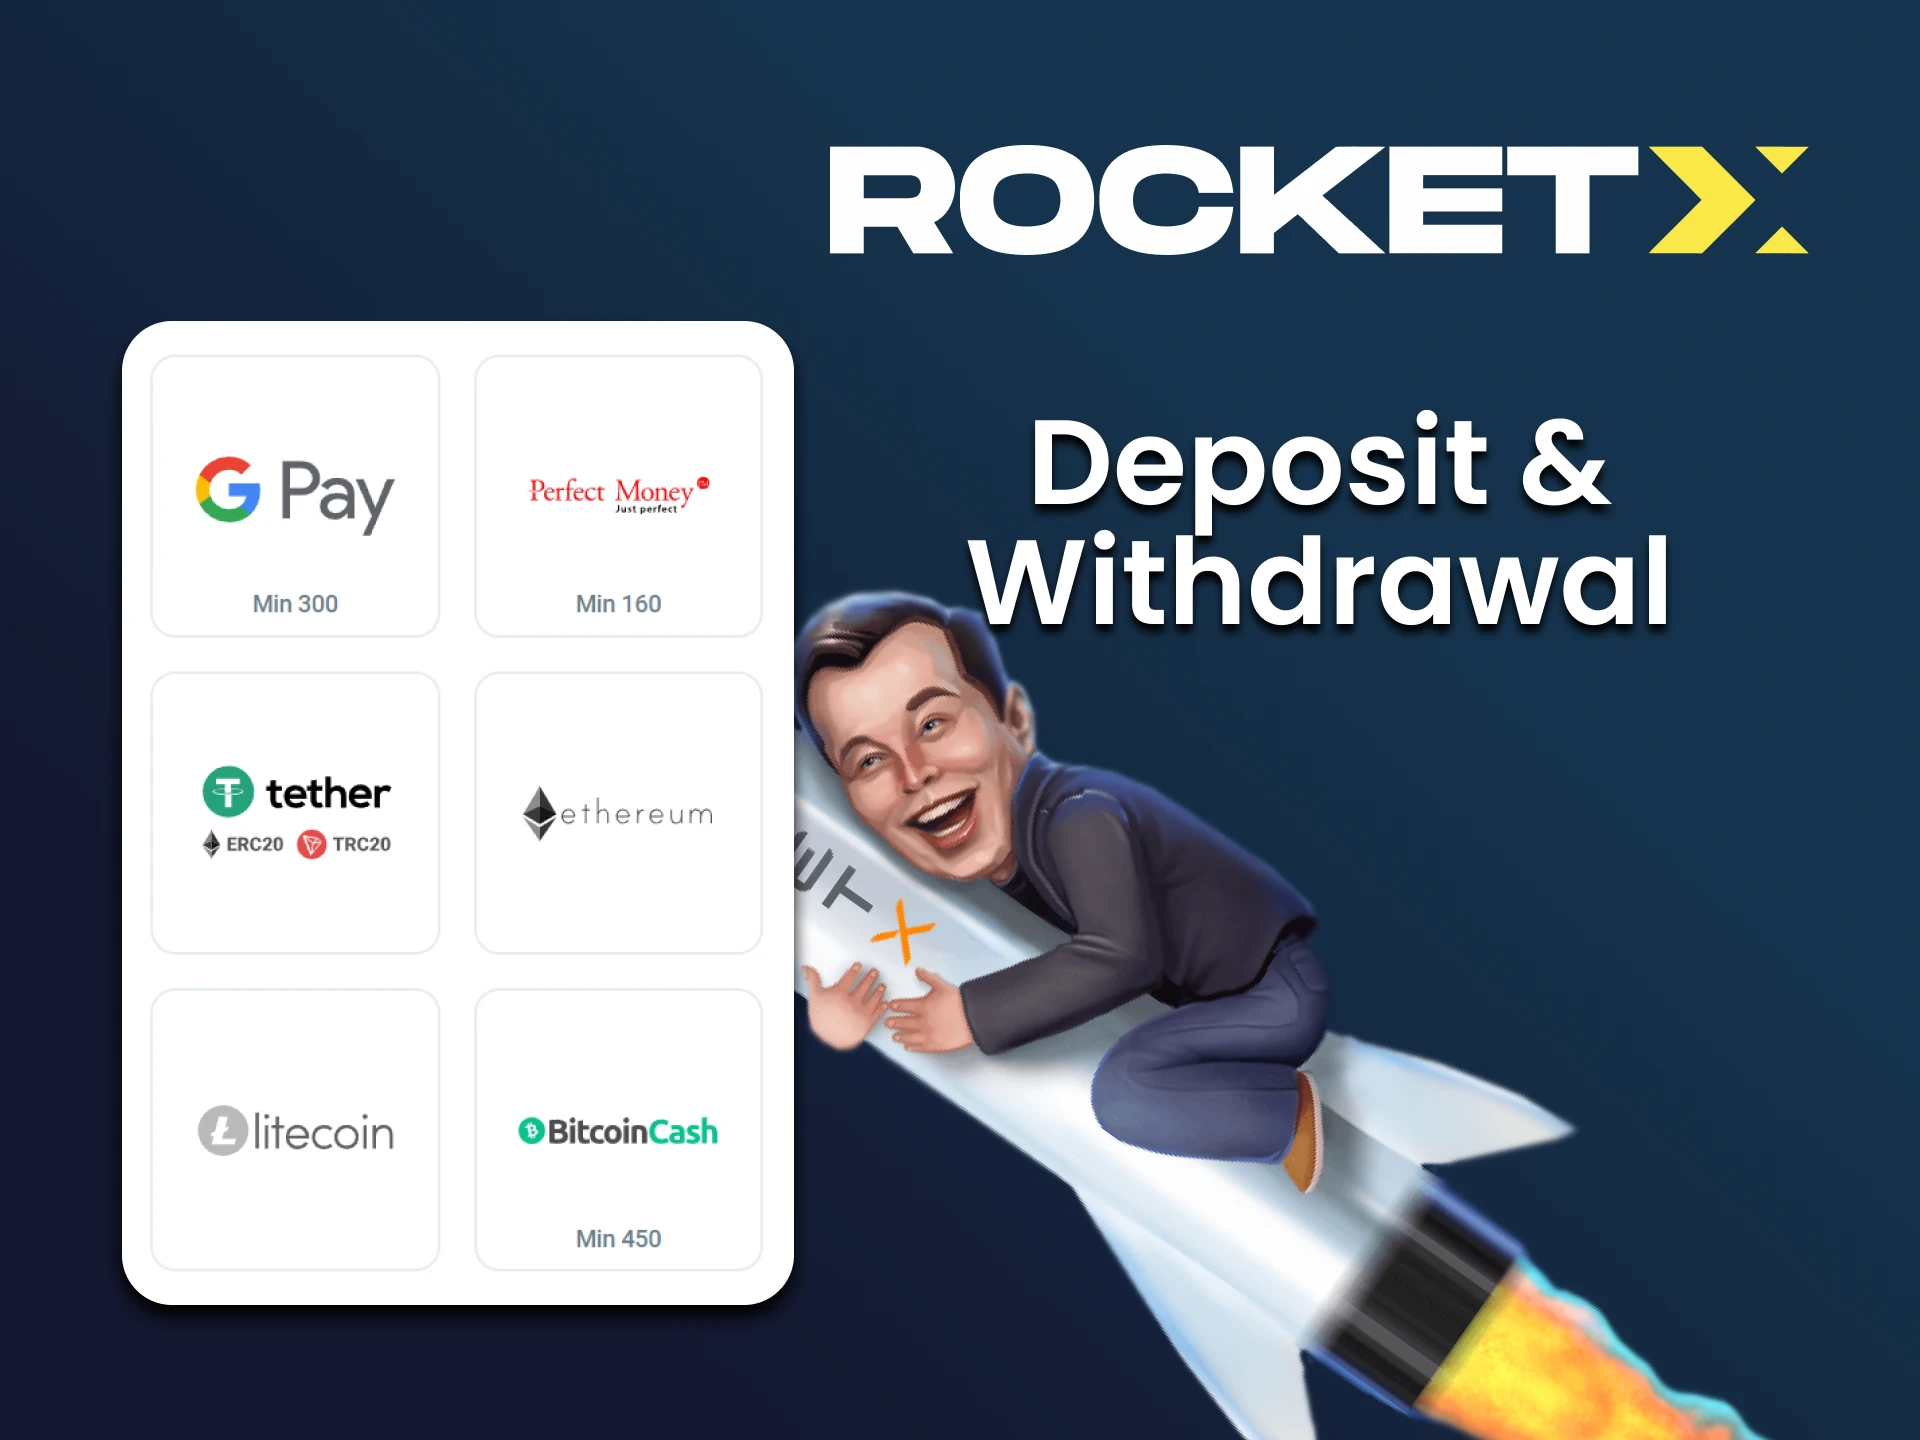 Deposit and withdraw funds in a convenient way to play Rocket X.